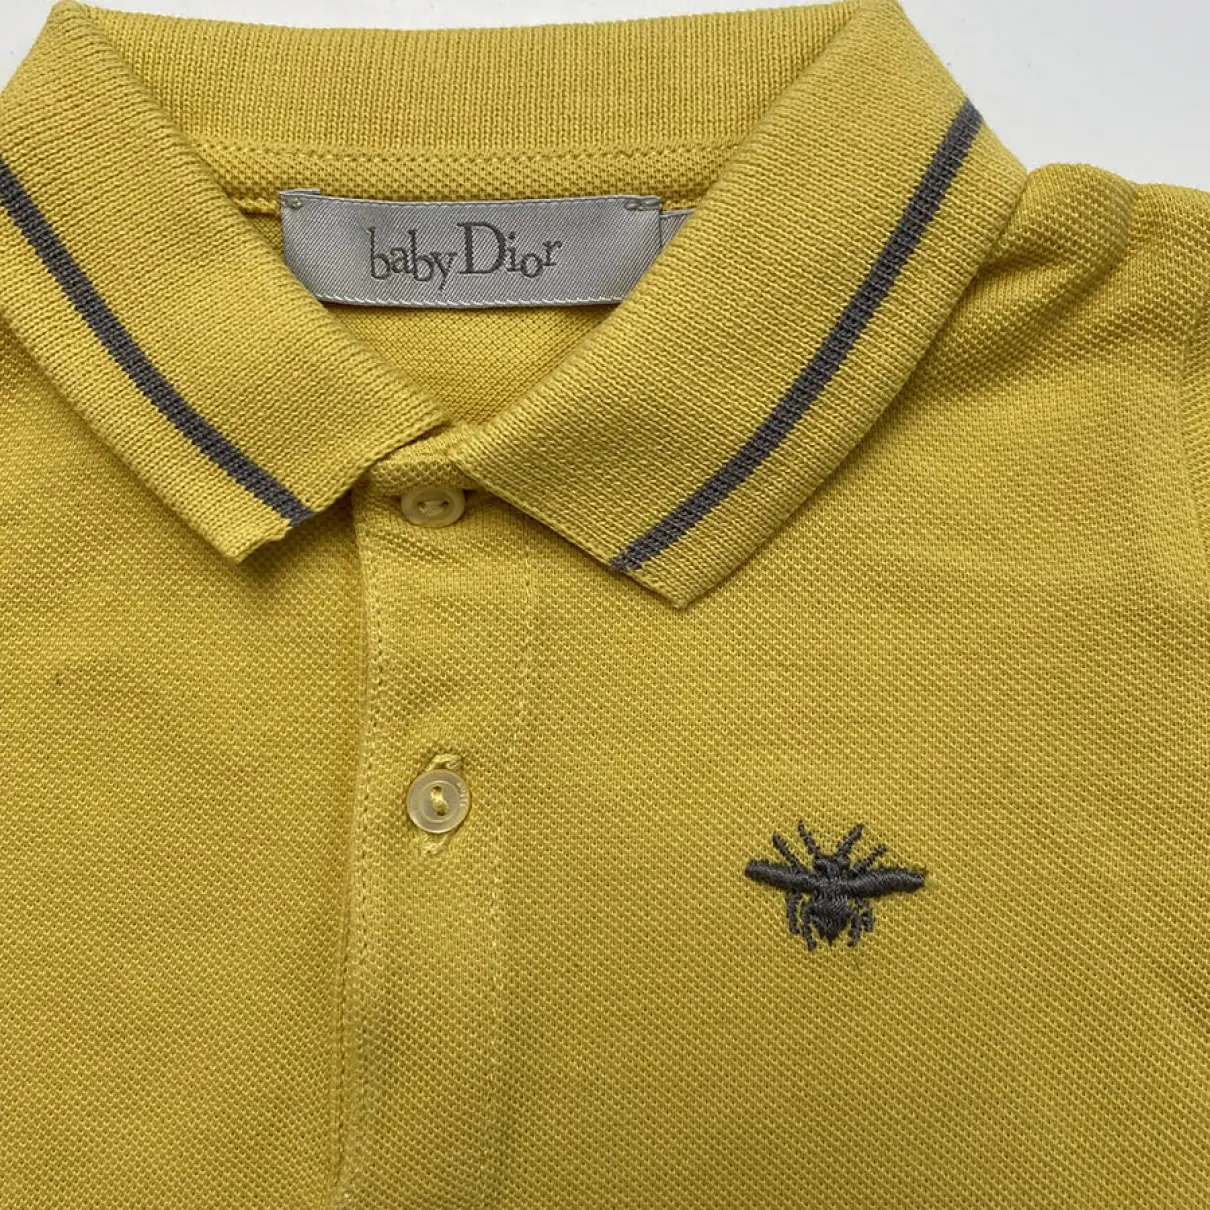 Buy Baby Dior Polo online